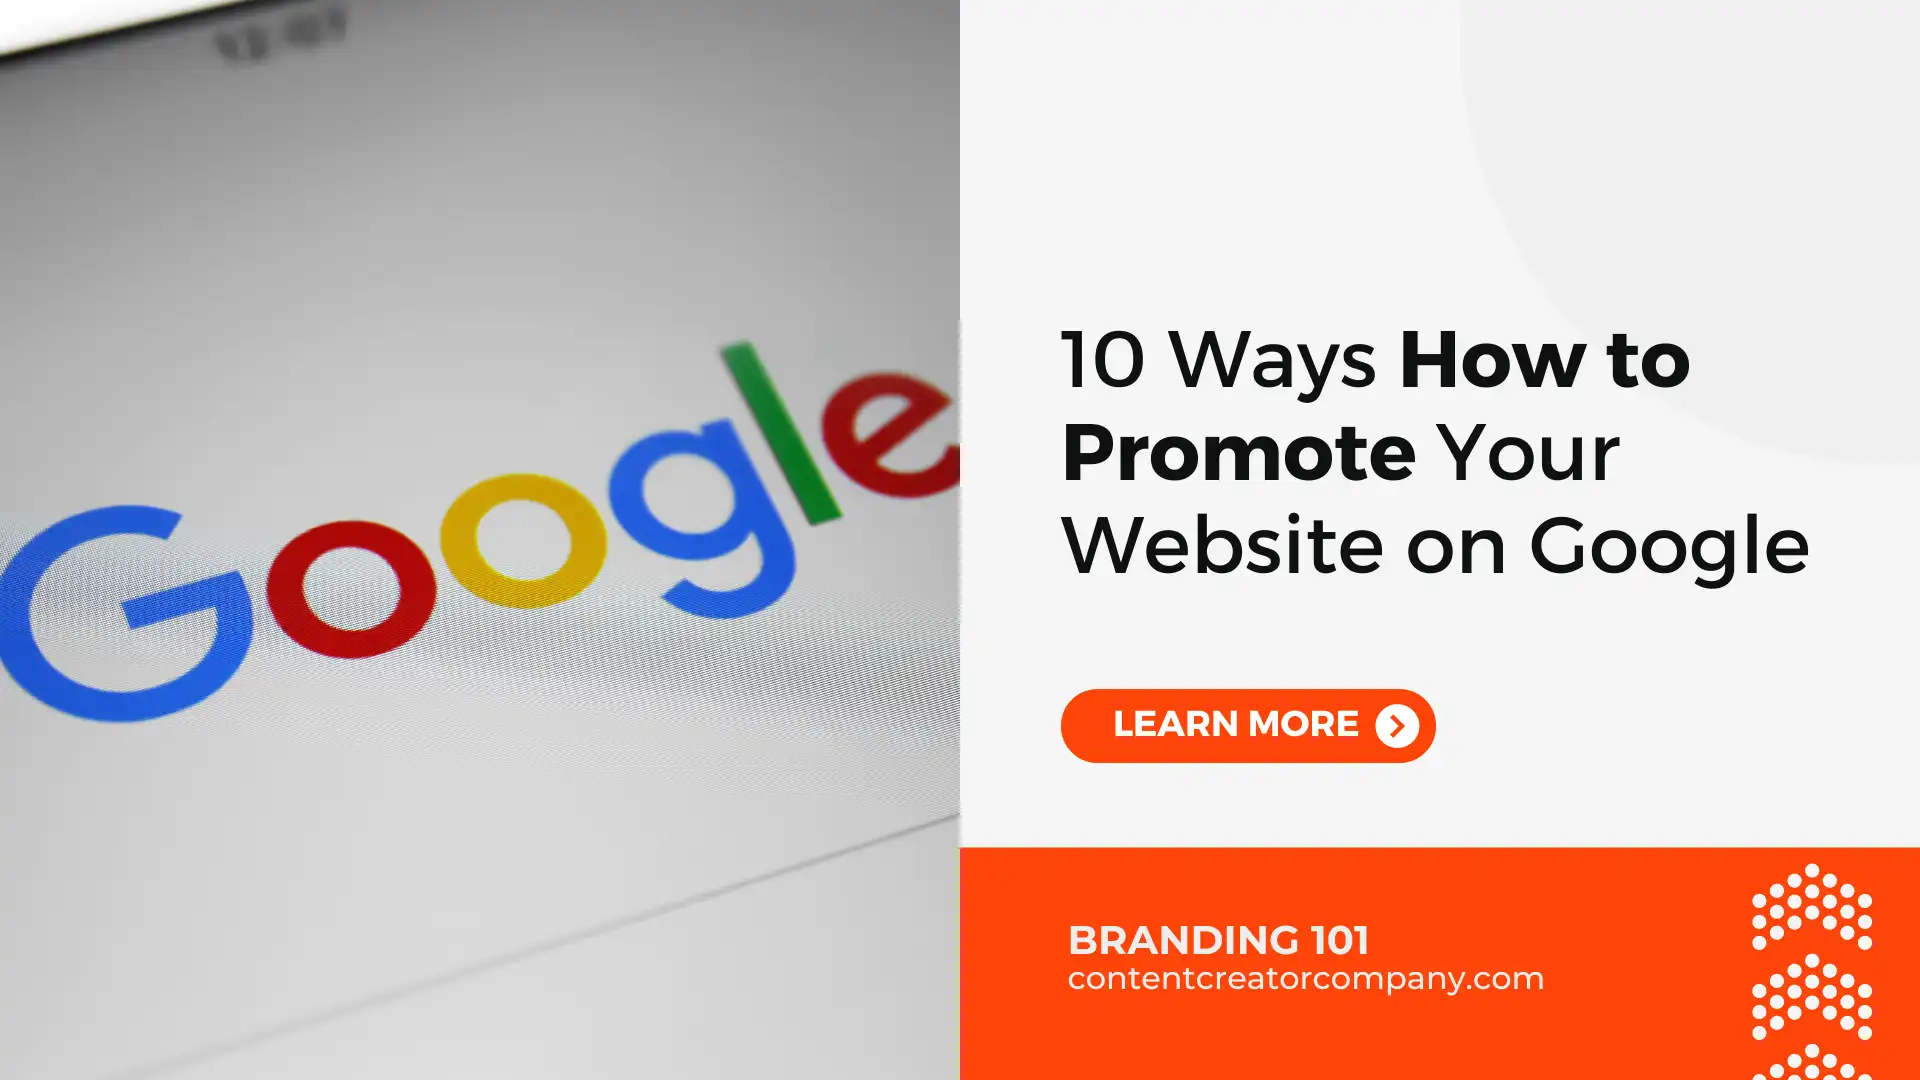 10 Ways How to Promote Your Website on Google